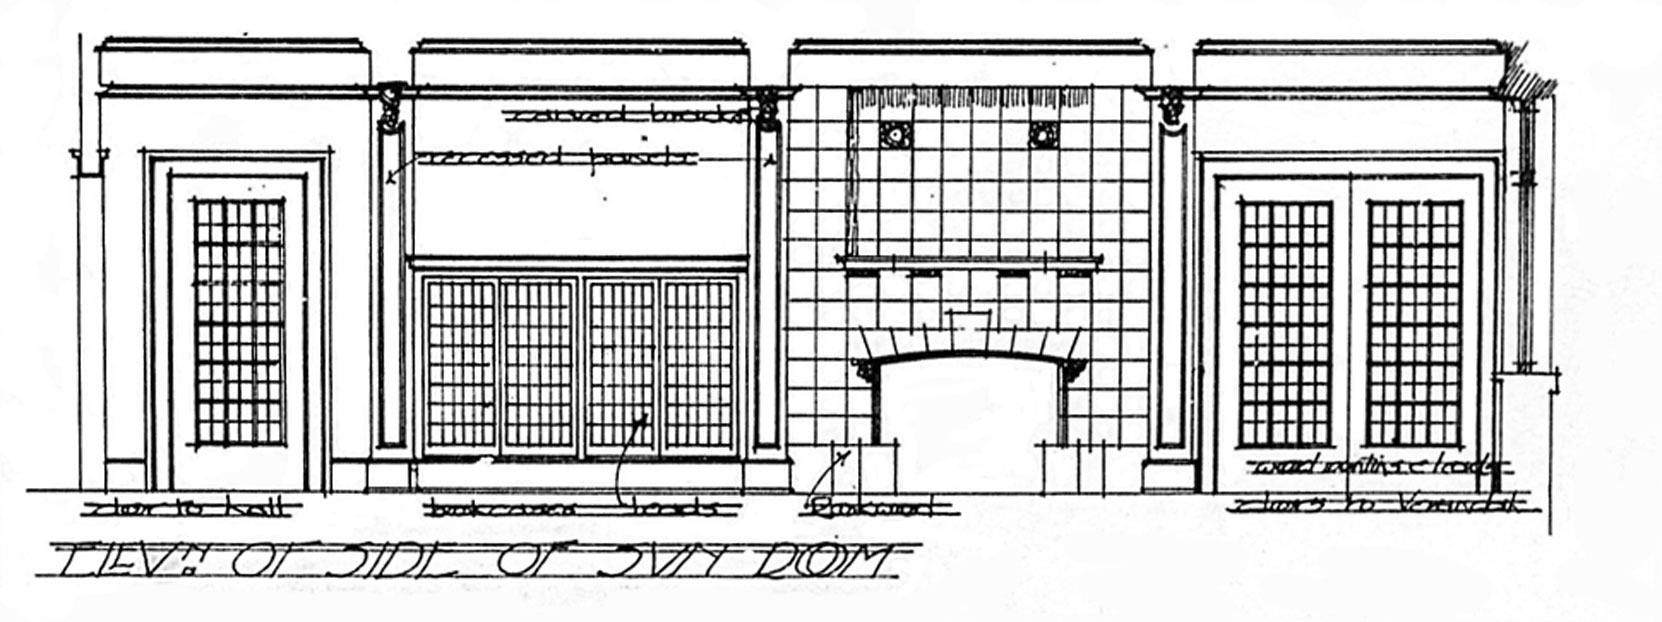 Detail from Samuel Maclure drawing for interior detail of Sun Room addition to Benvenuto, 1911. (courtesy of UVic Library - Special Collections)